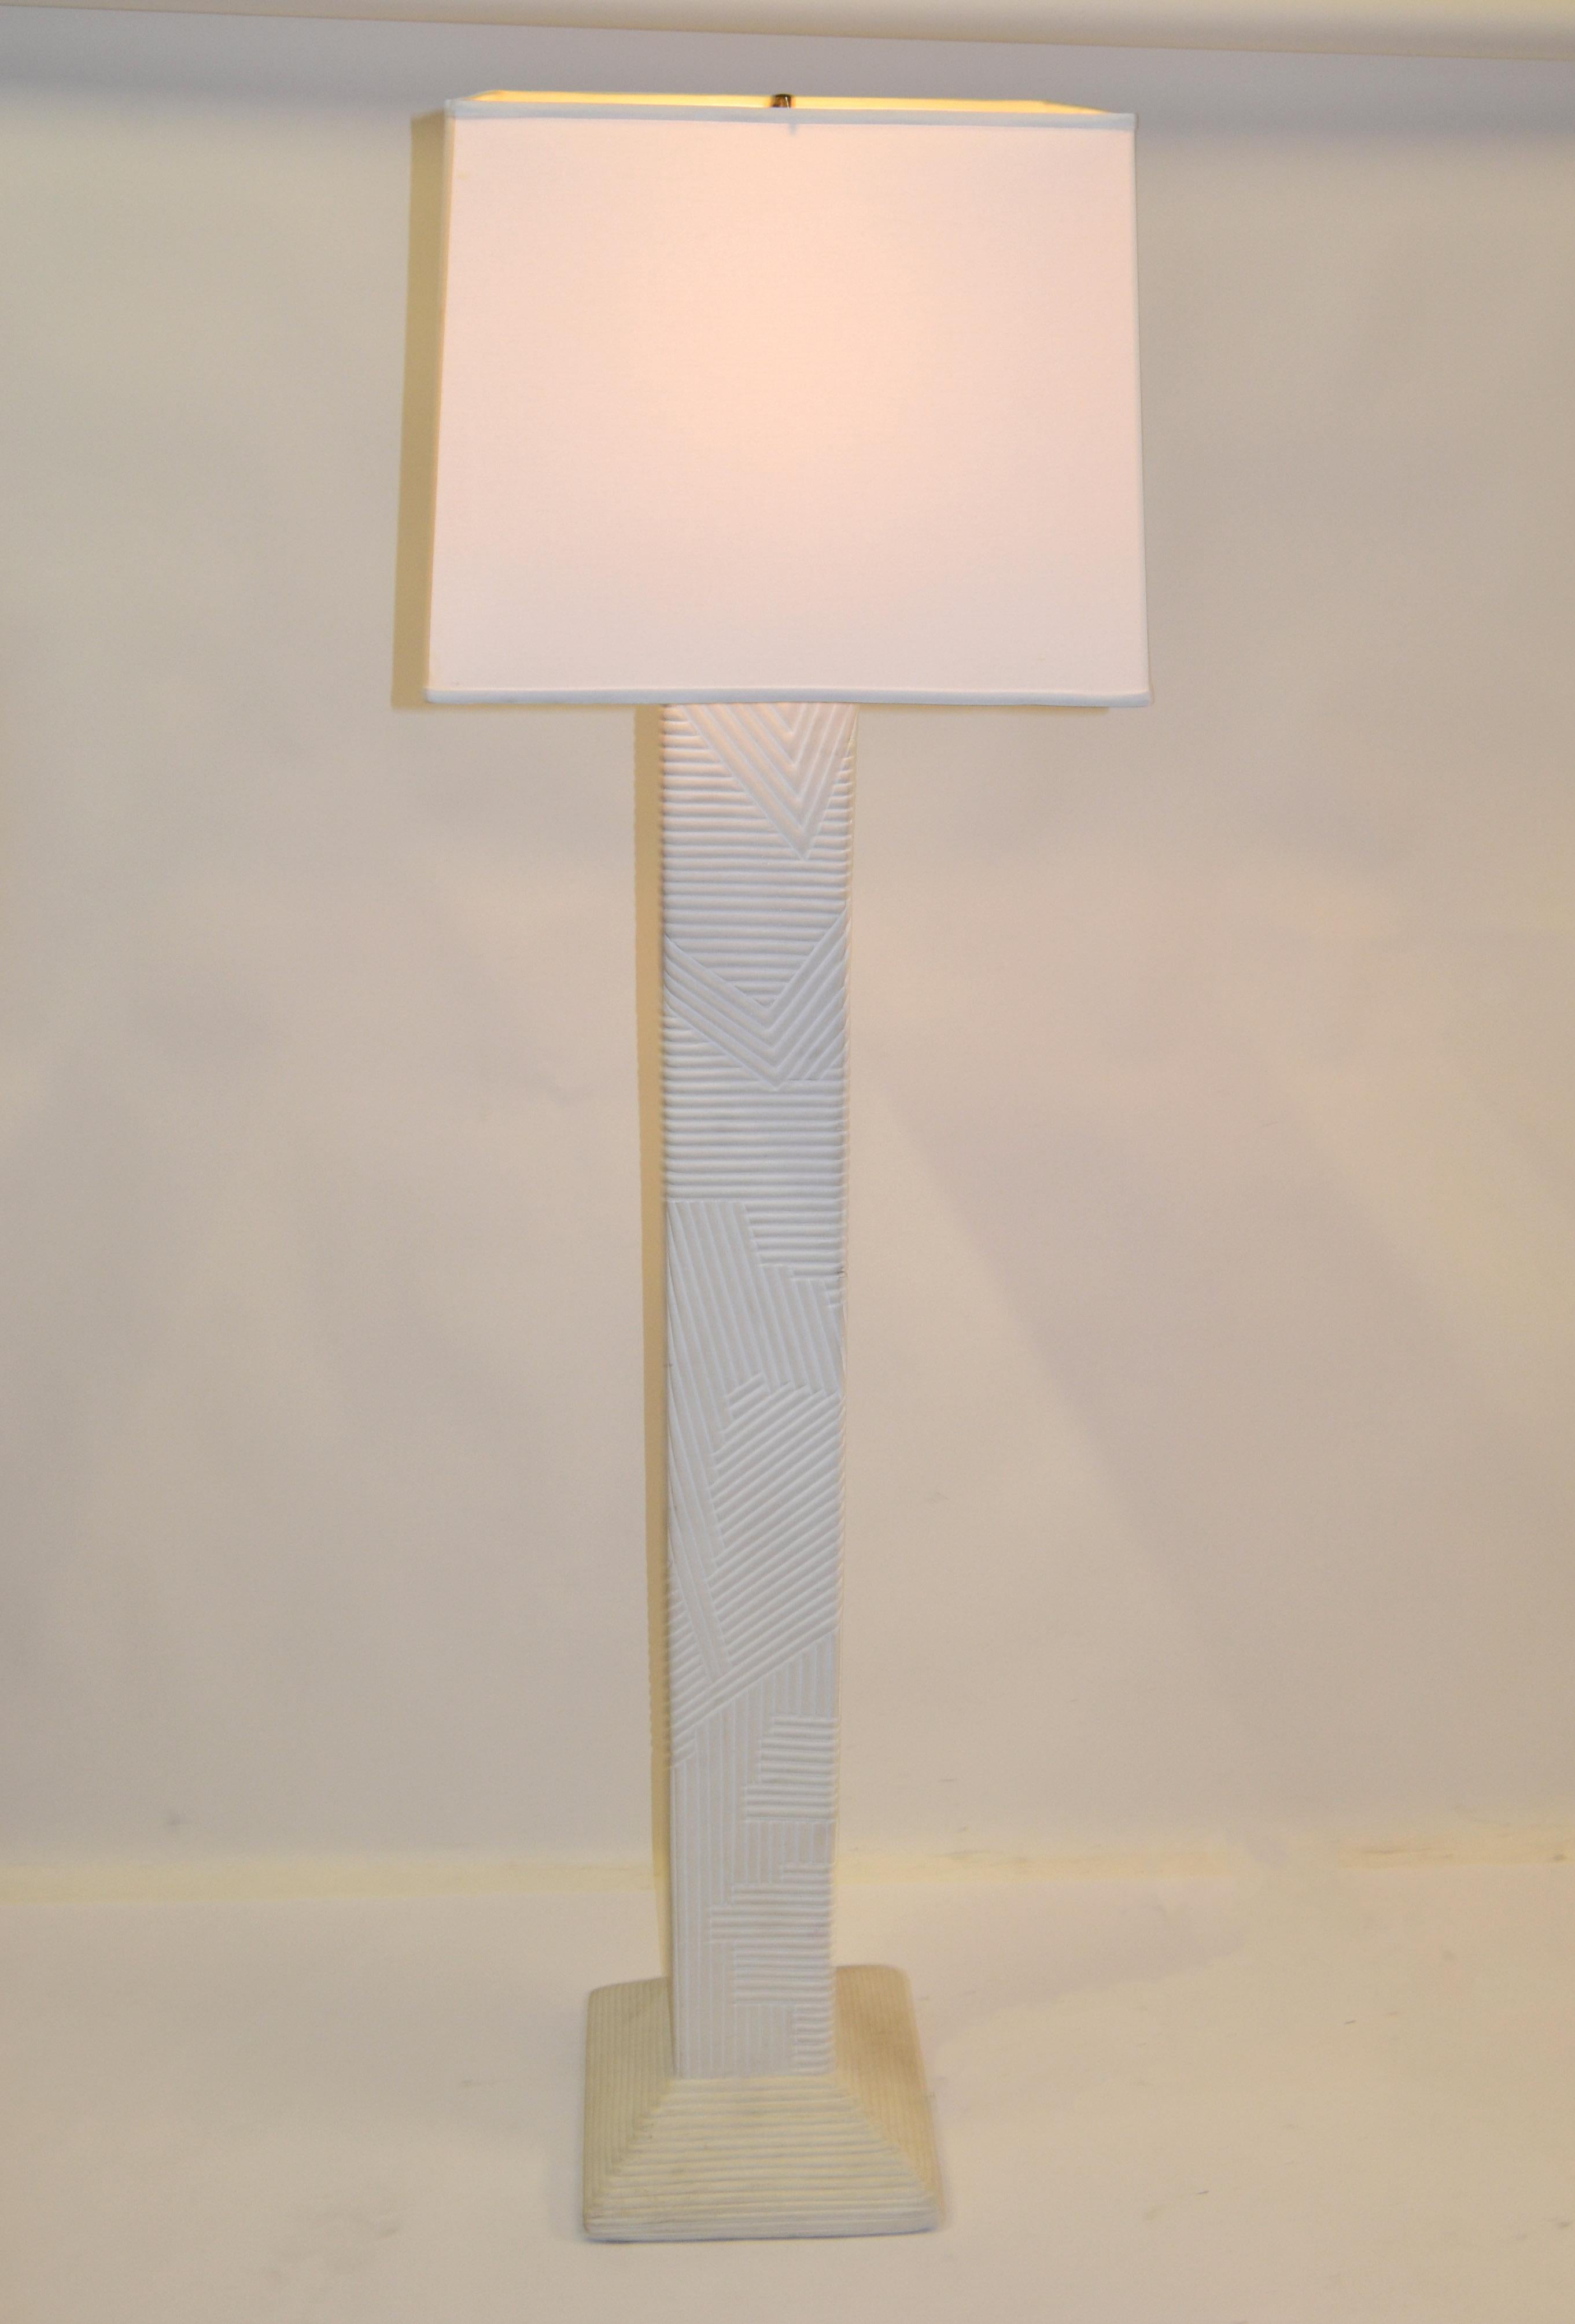 Hand-Crafted 1970 Mid-Century Modern Geometric Textured Iconic Sculptural Plaster Lamp Sirmos For Sale